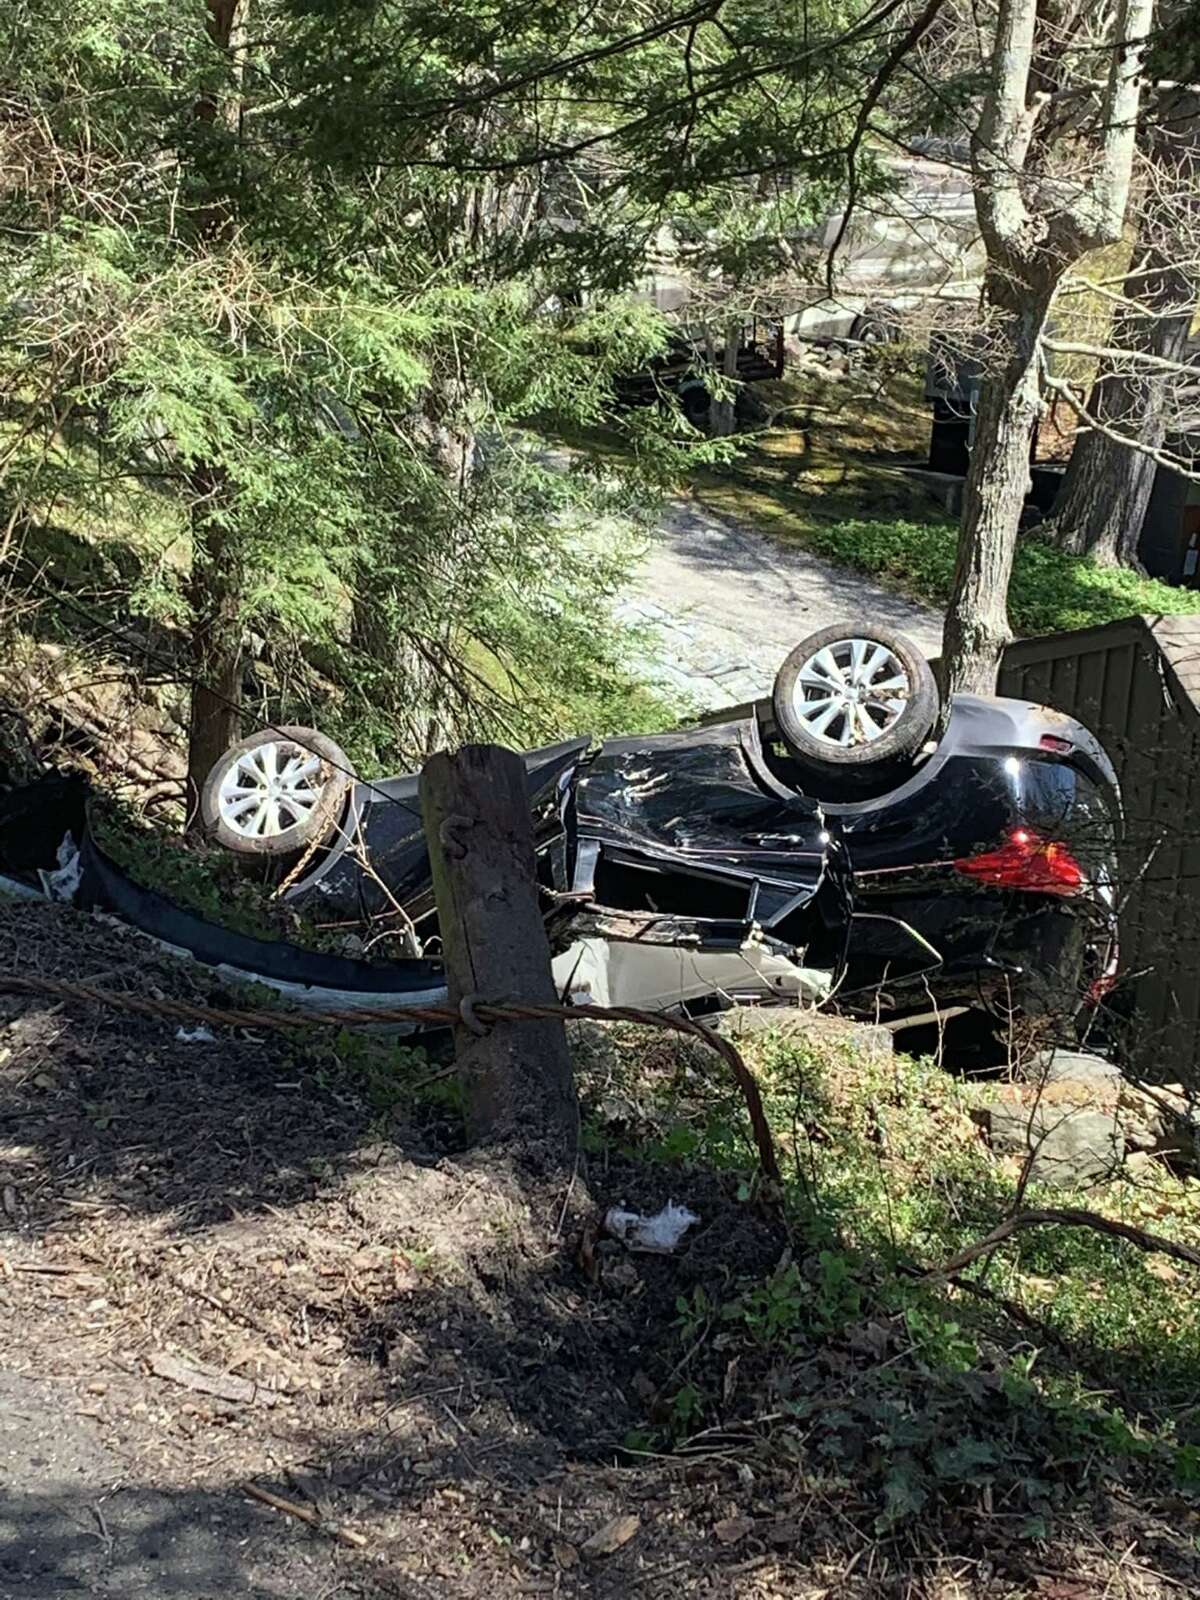 First responders found a person trapped inside a car that fell 15 feet down an embankment near the Sherman town line Friday.